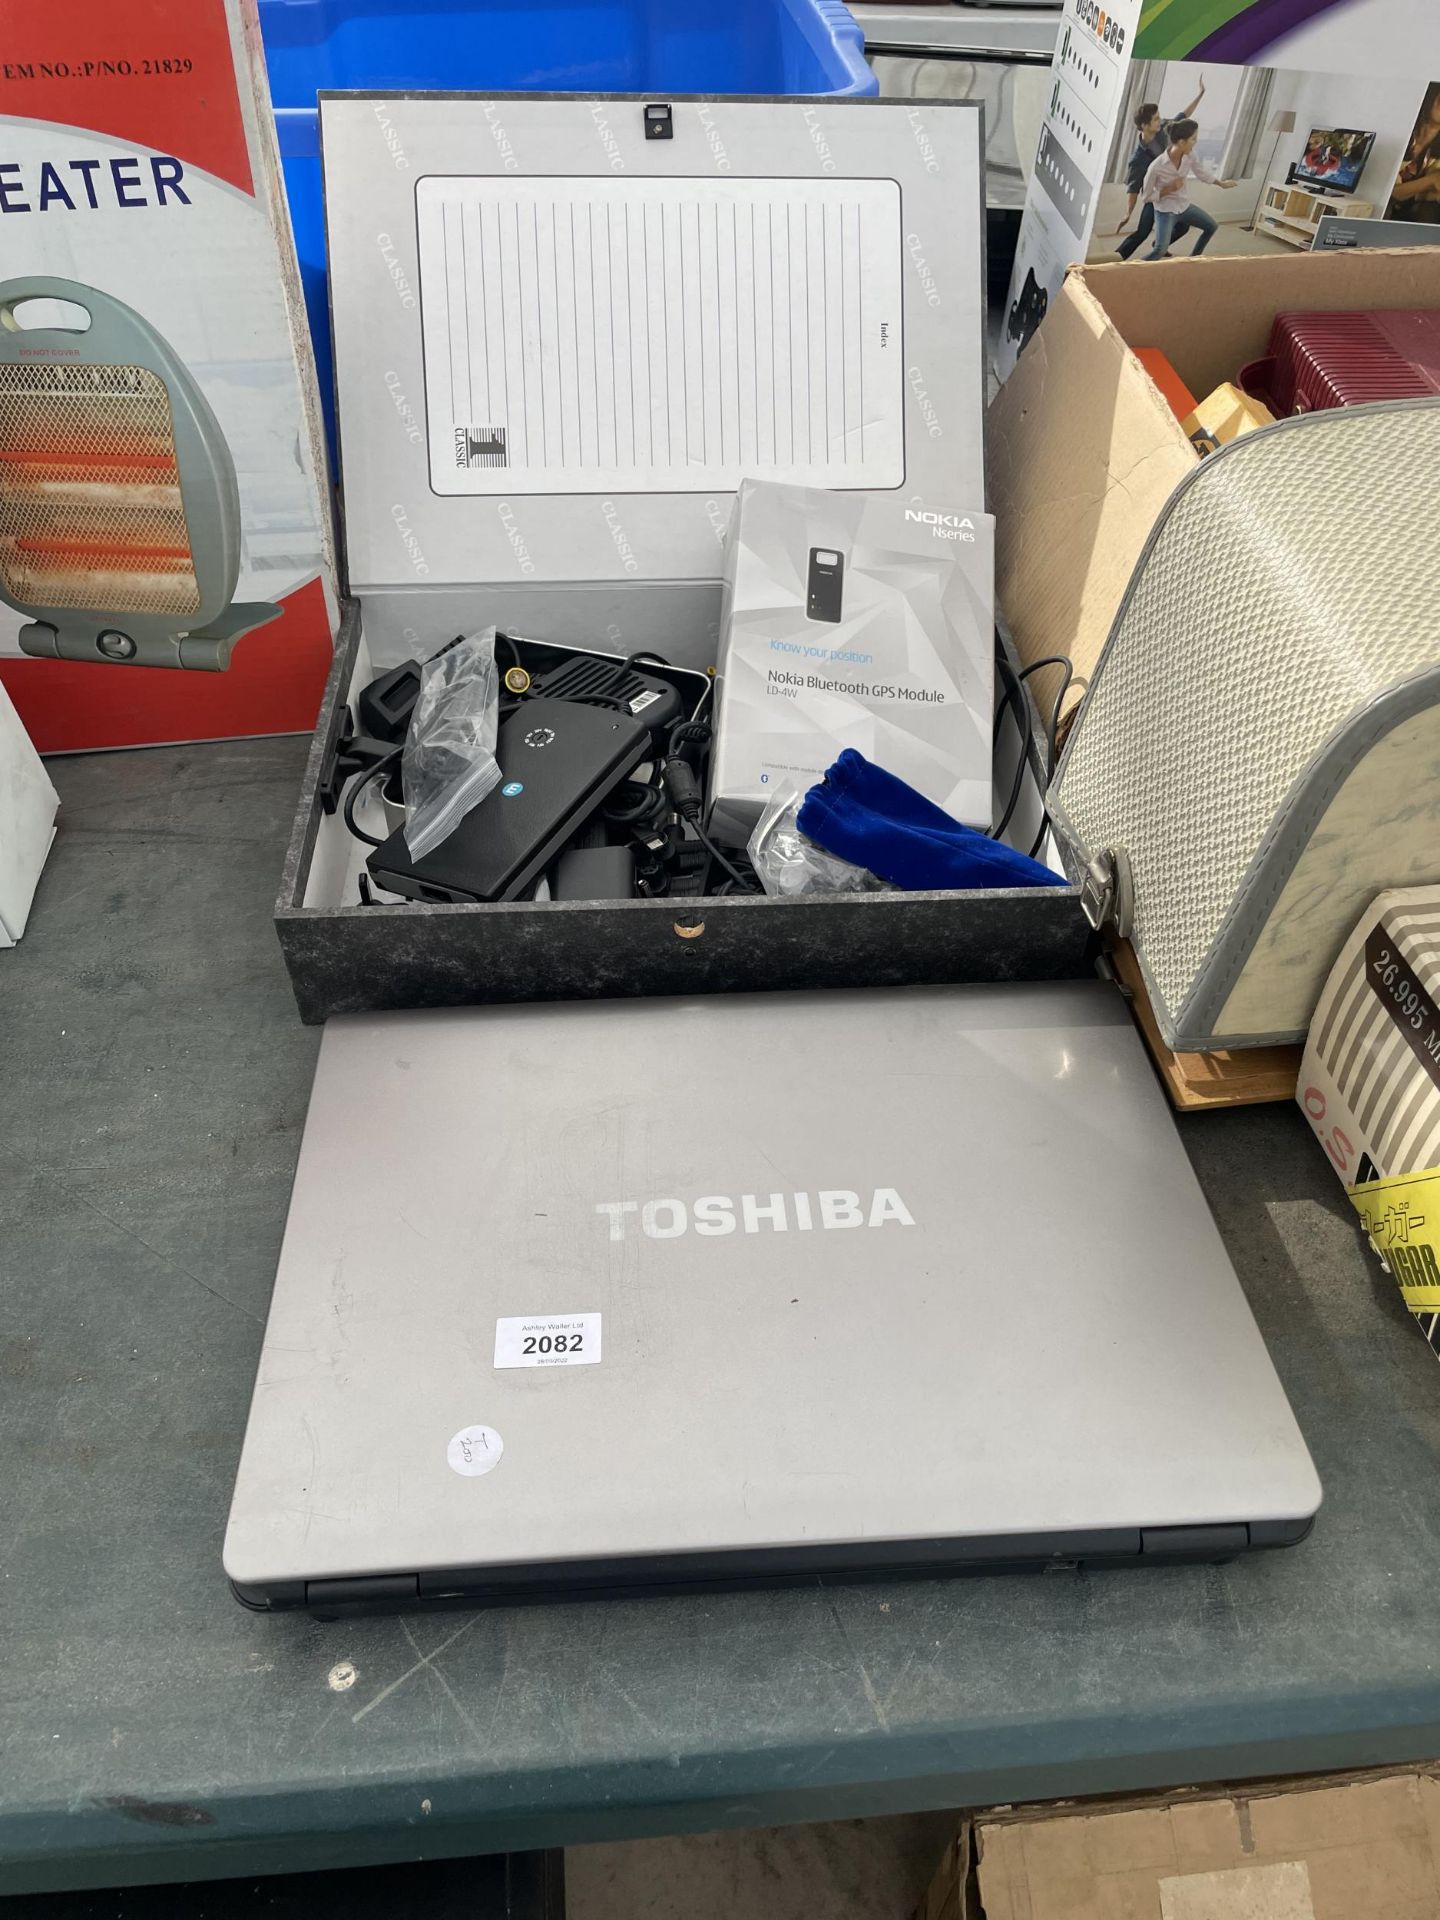 A TOSHIBA LAPTOP AND AN ASSORTMENT OF CABLES